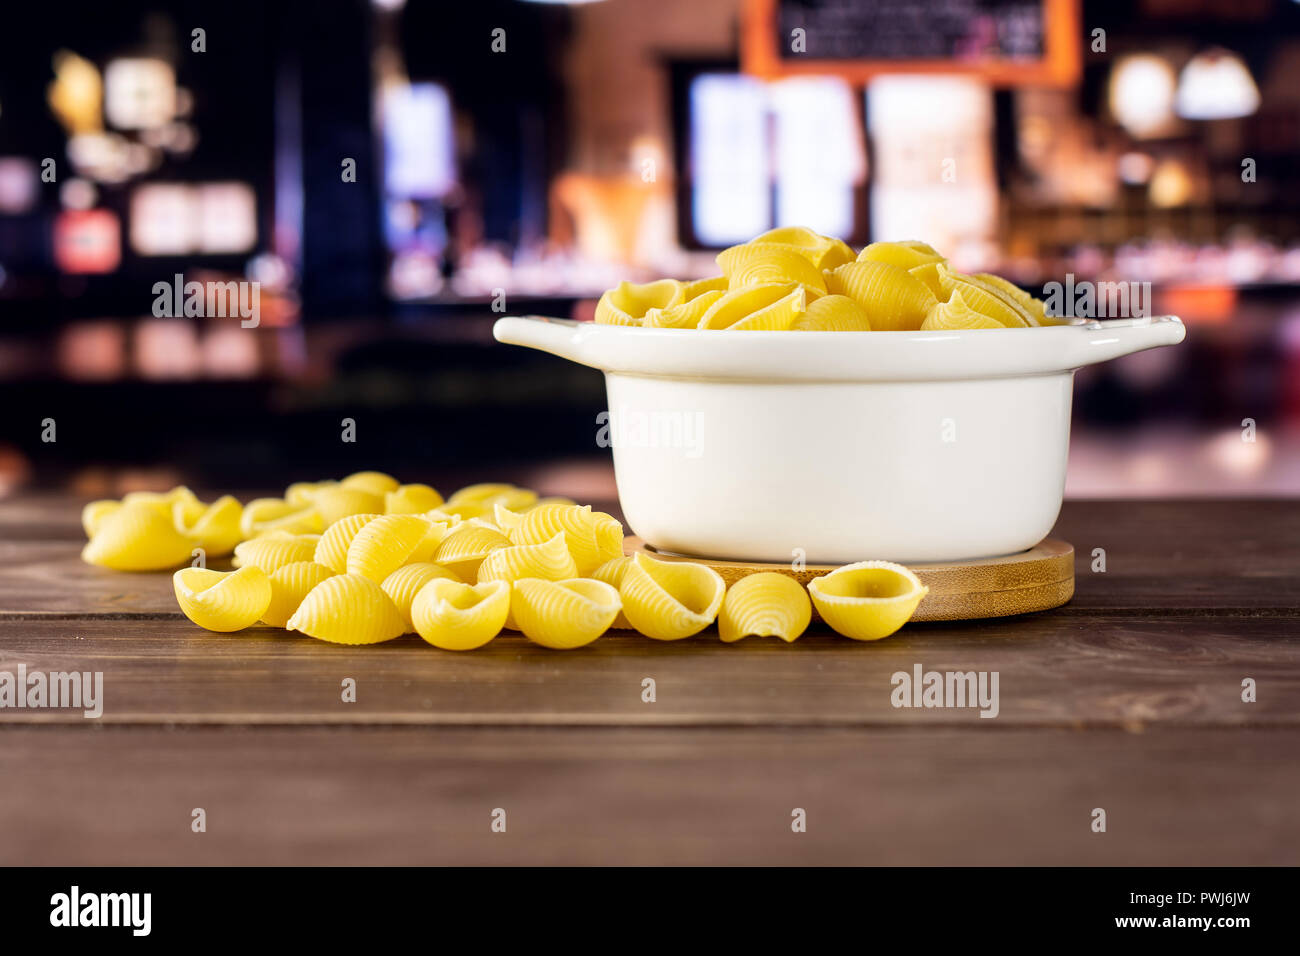 Lot of whole raw yellow pasta conchiglie variety in a ceramic stewpan with restaurant in background Stock Photo